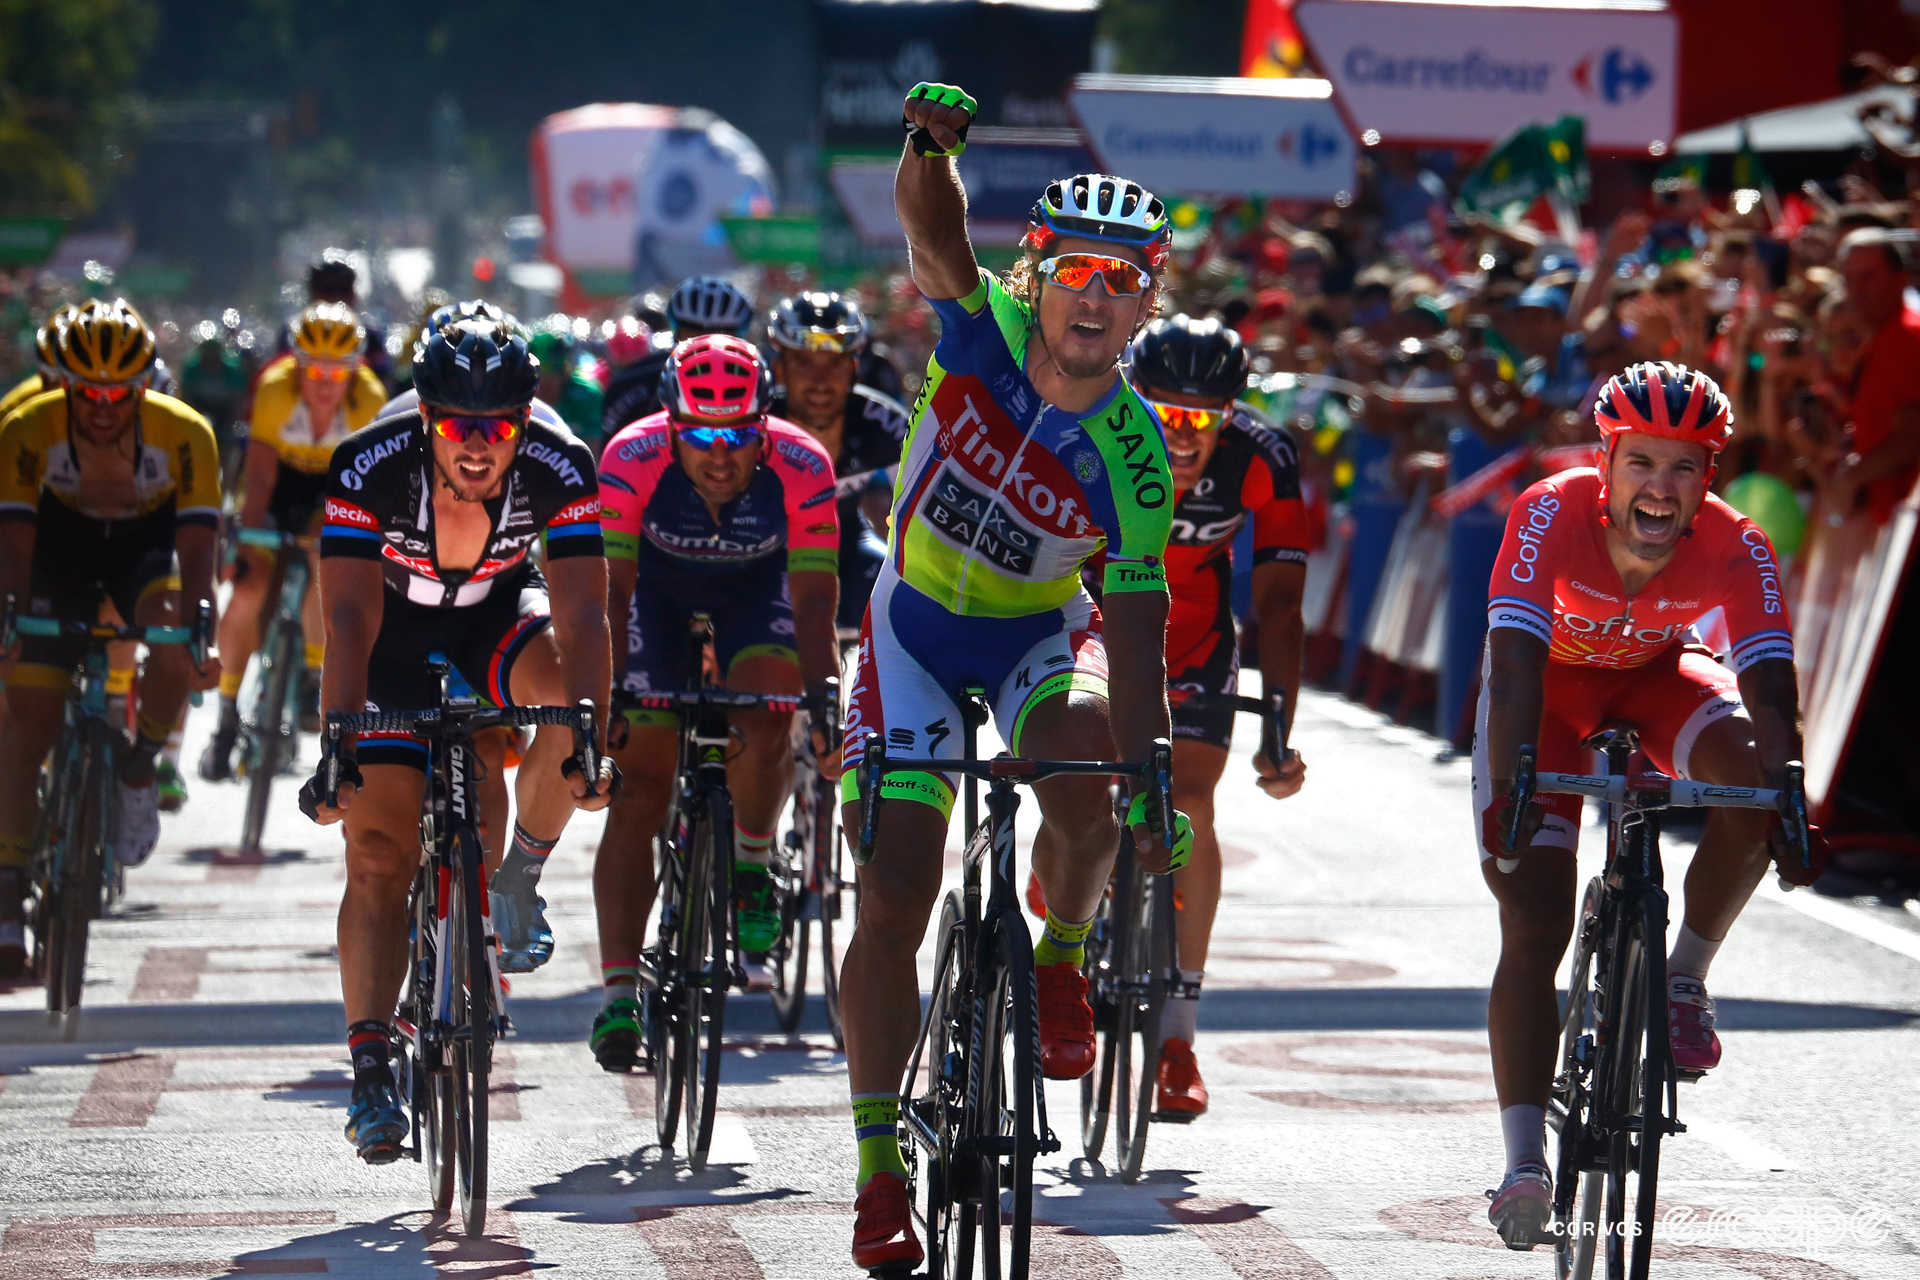 Peter Sagan celebrates winning a stage at the 2015 Vuelta a España with one arm aloft.